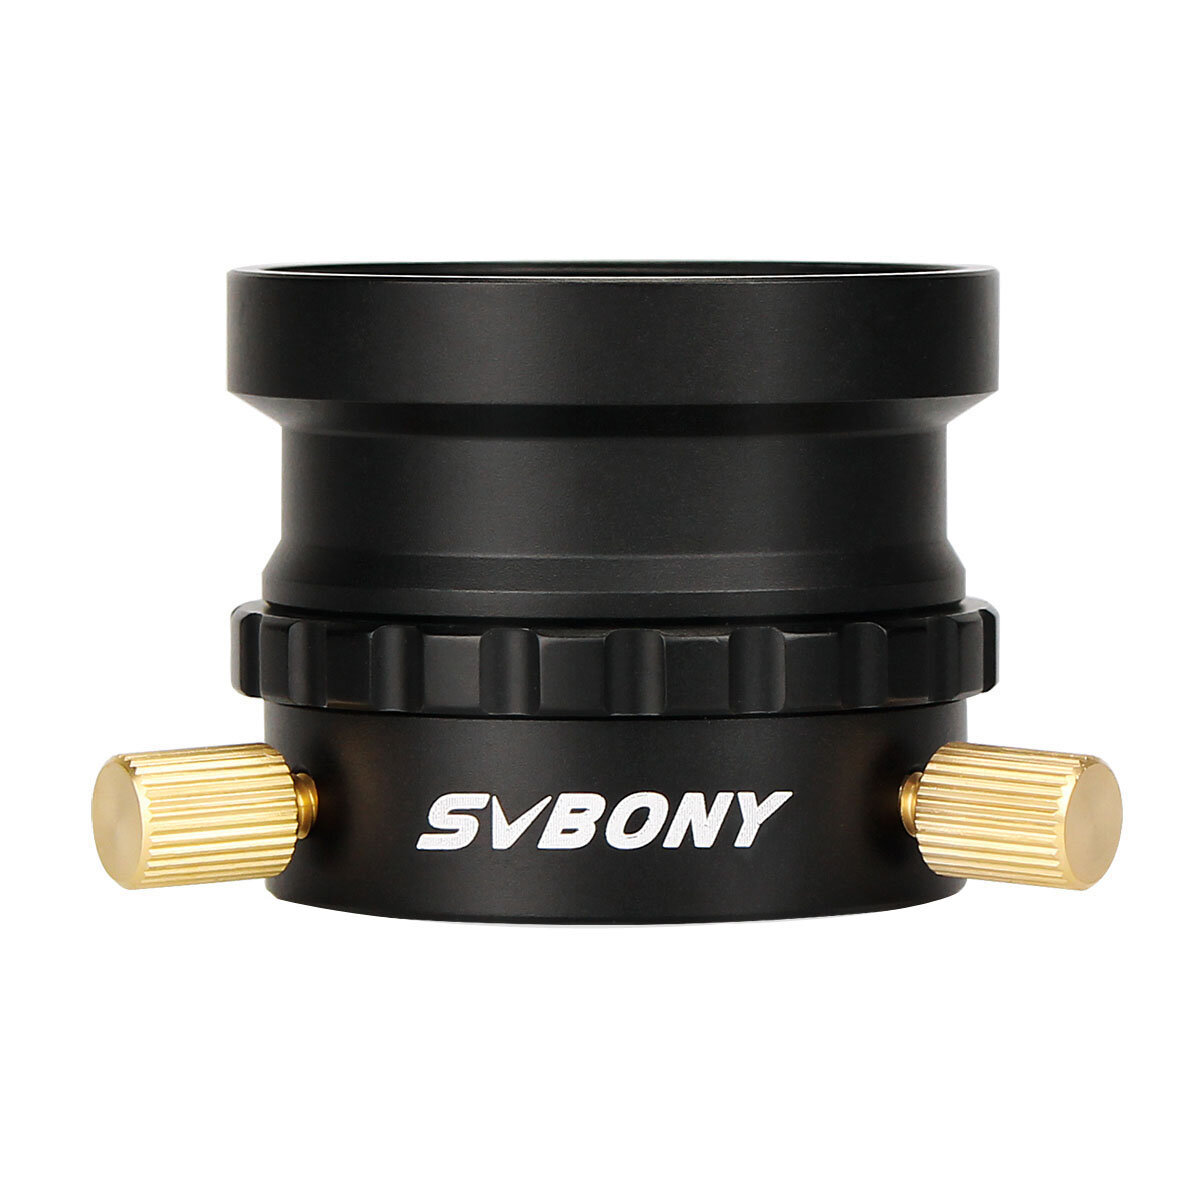 

SVBONY 1.25" Universal Focuser Adapter Telescope Accessories M42x0.75 with 1.25 inch Eyepiece Base